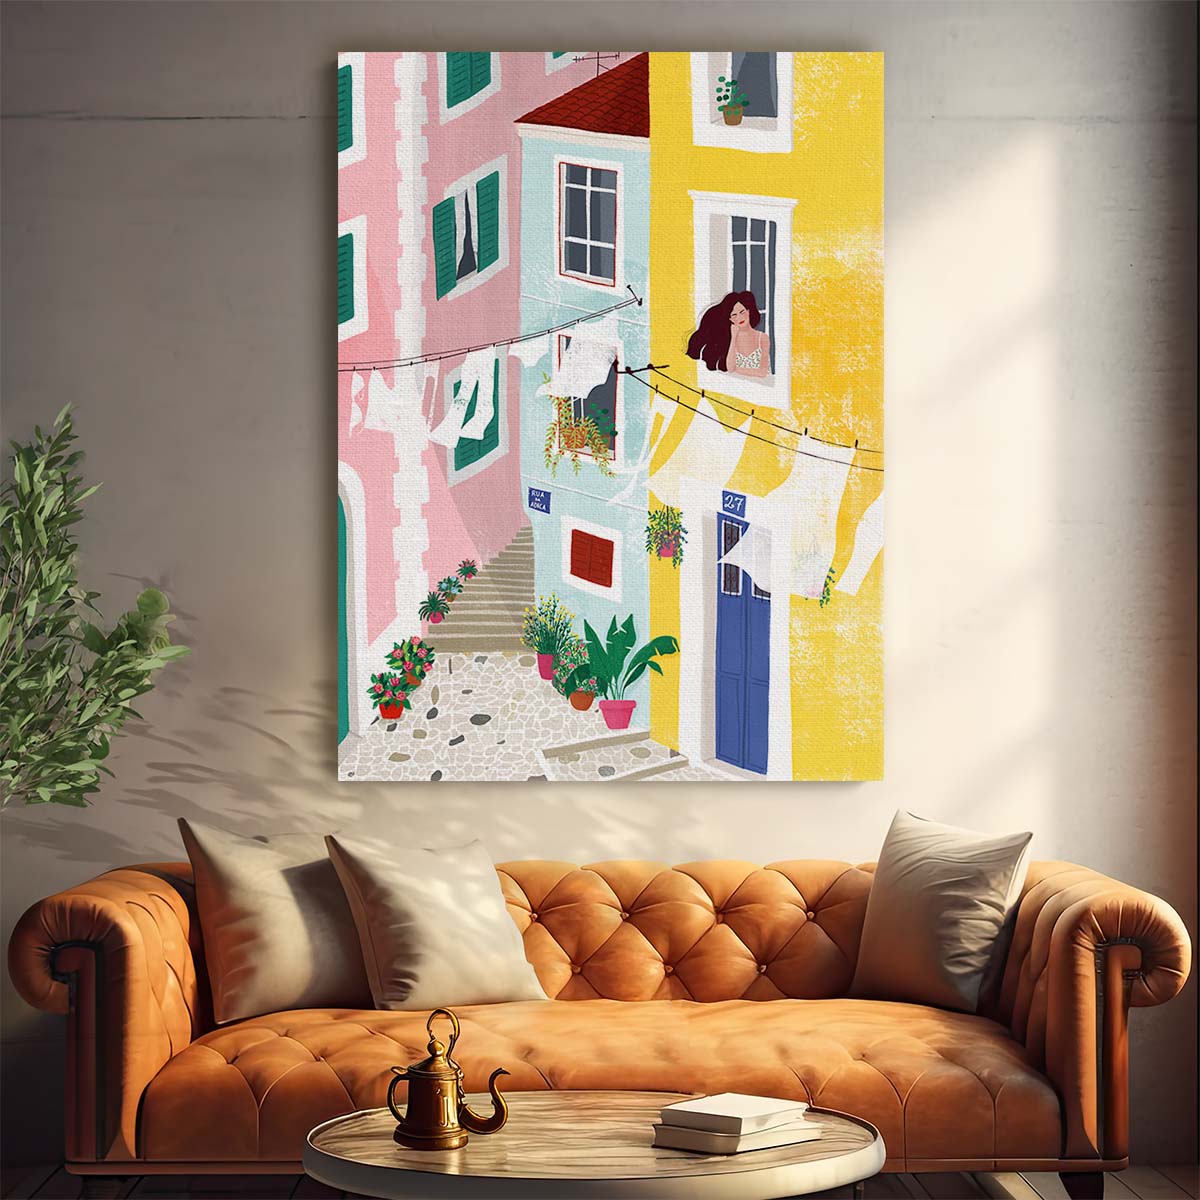 Colorful Urban Summer Girl Illustration Wall Art by Luxuriance Designs, made in USA